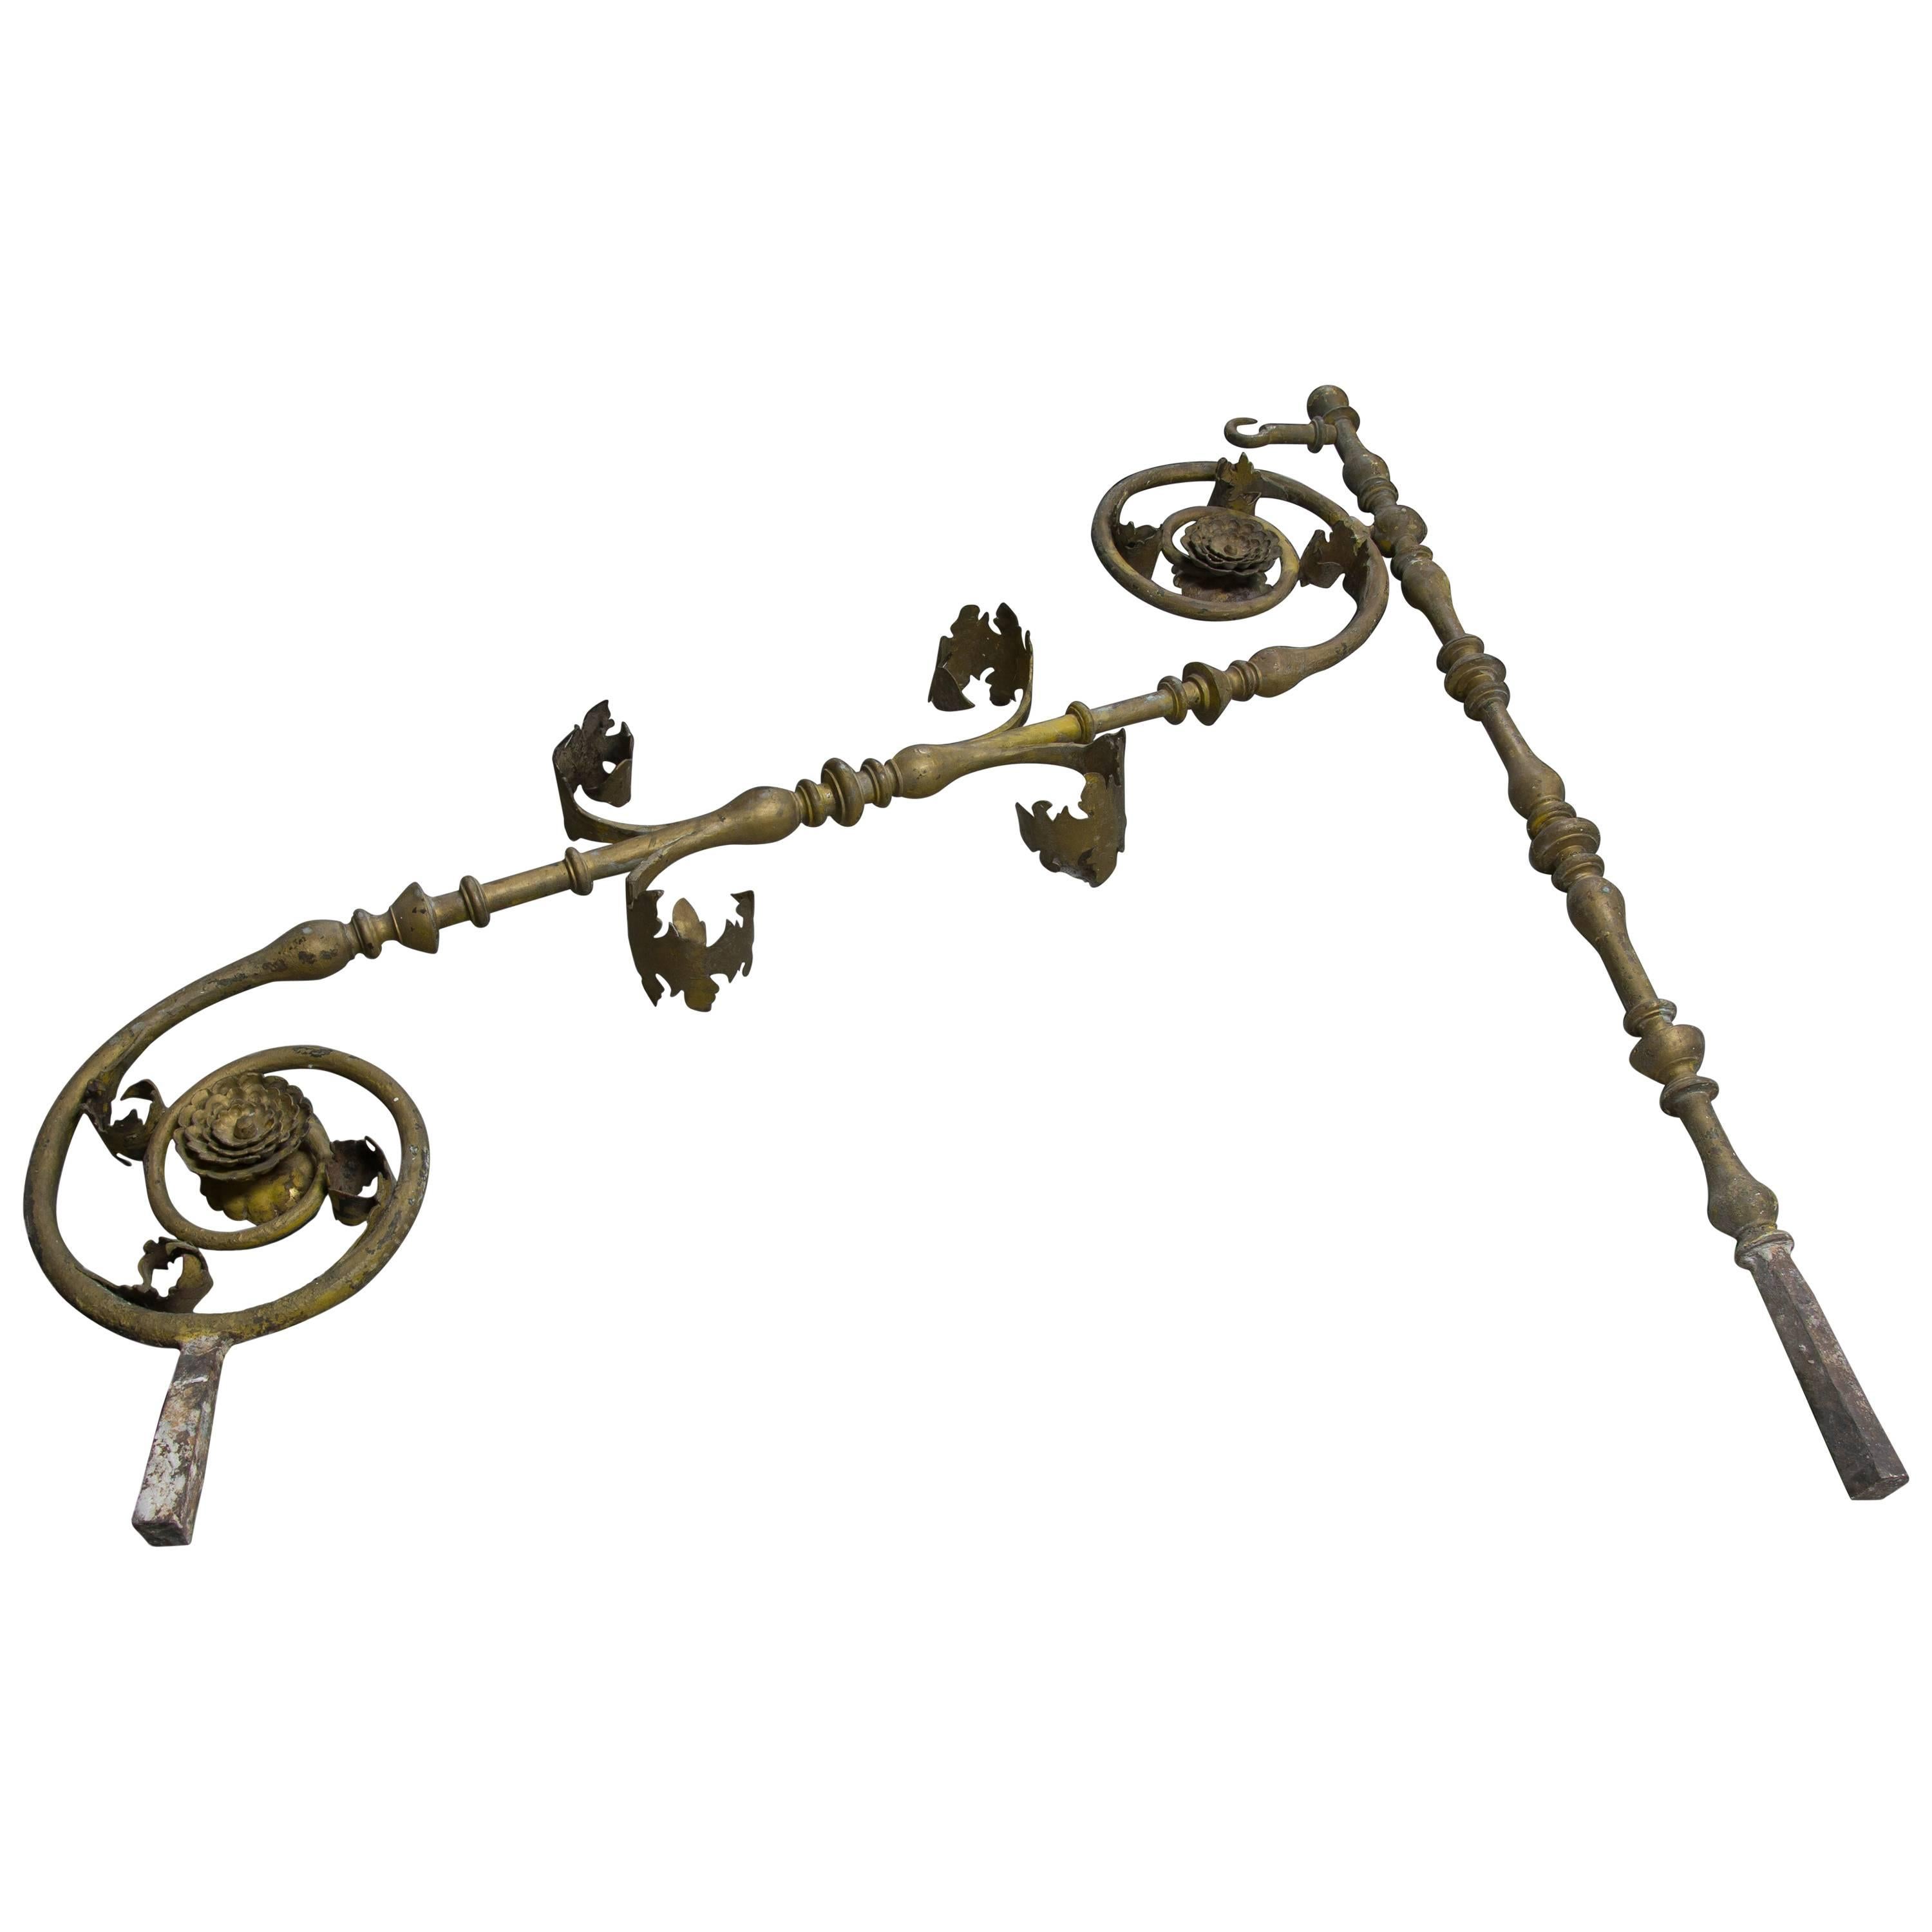 Set of Two wrought Iron Supports, 16th-17th Century